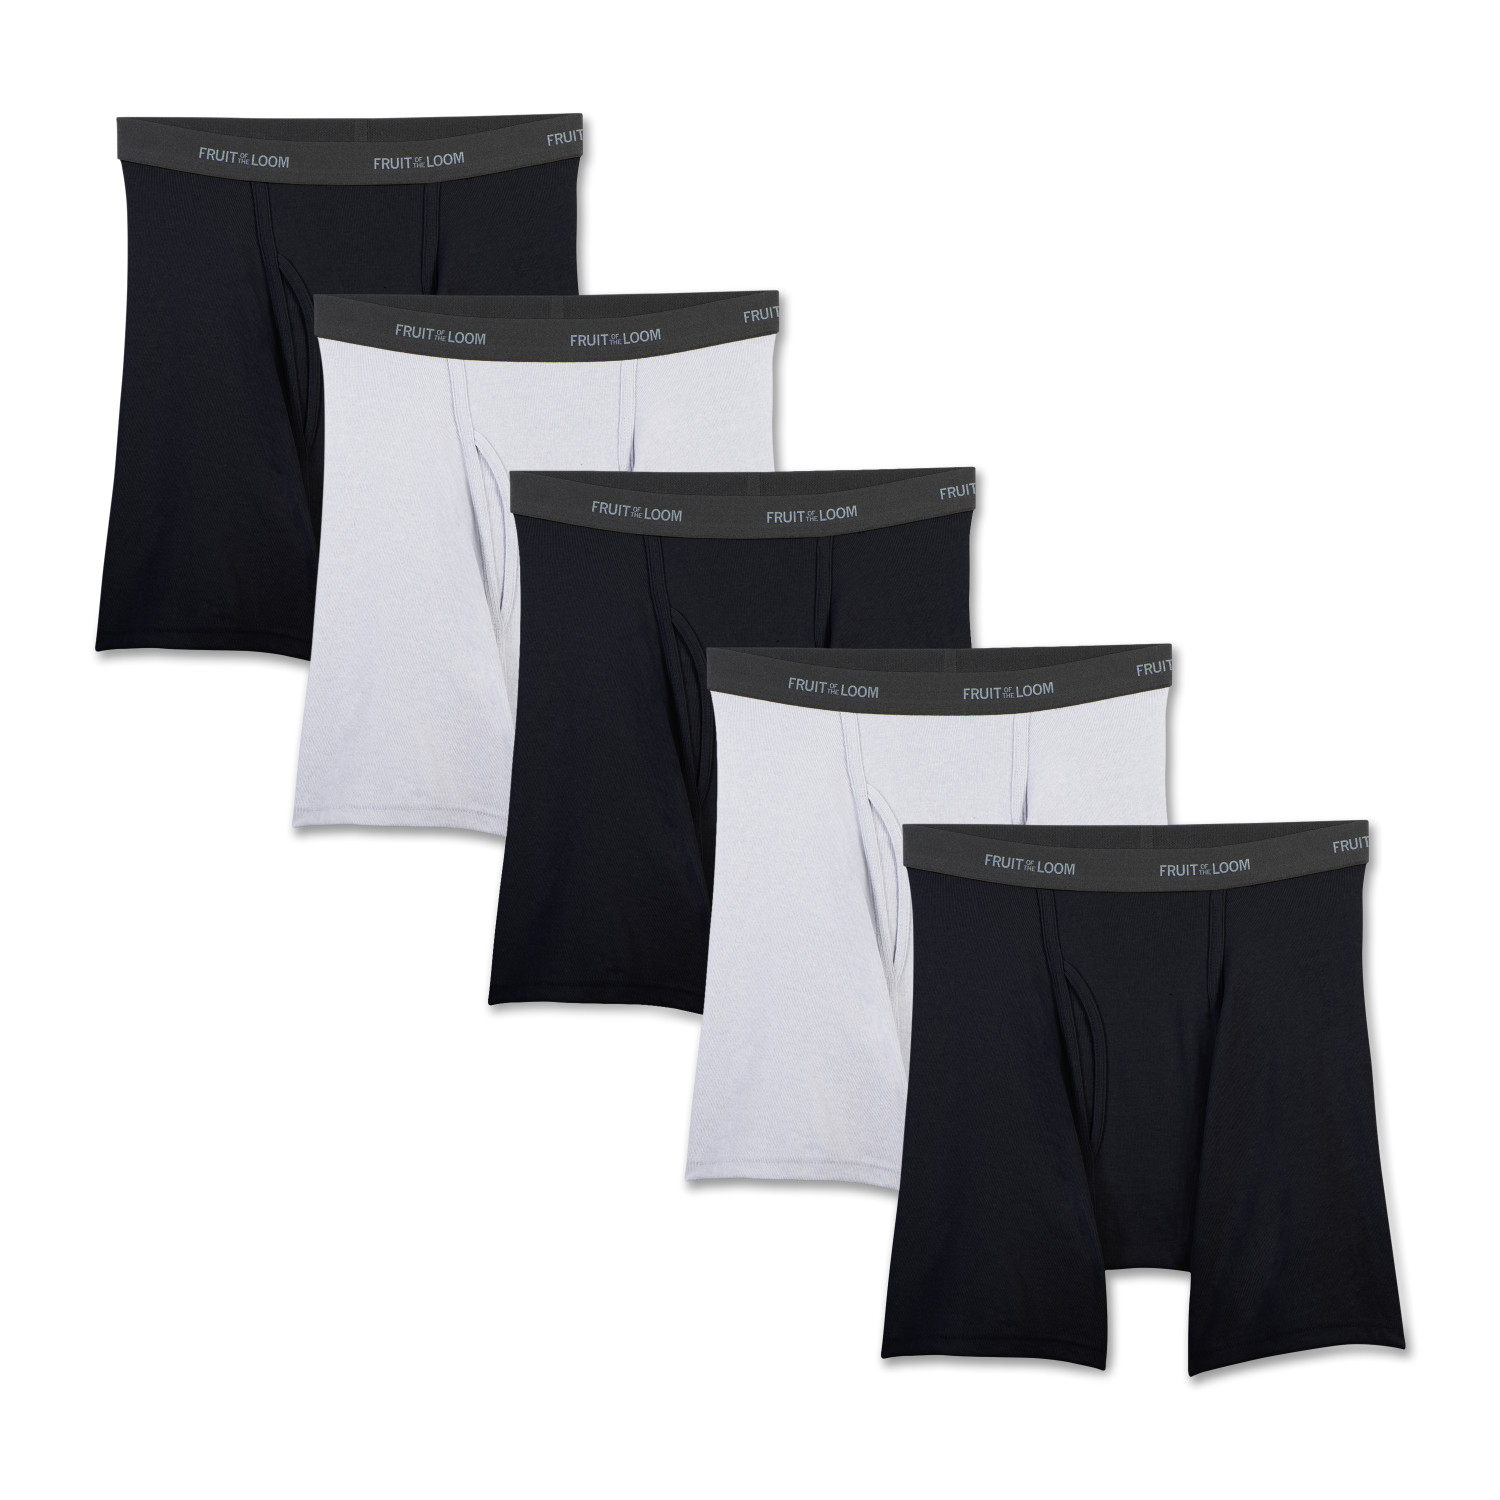 Fruit of the Loom Men's Beyondsoft Black and Gray Boxer Briefs, 5 Pack - image 1 of 5